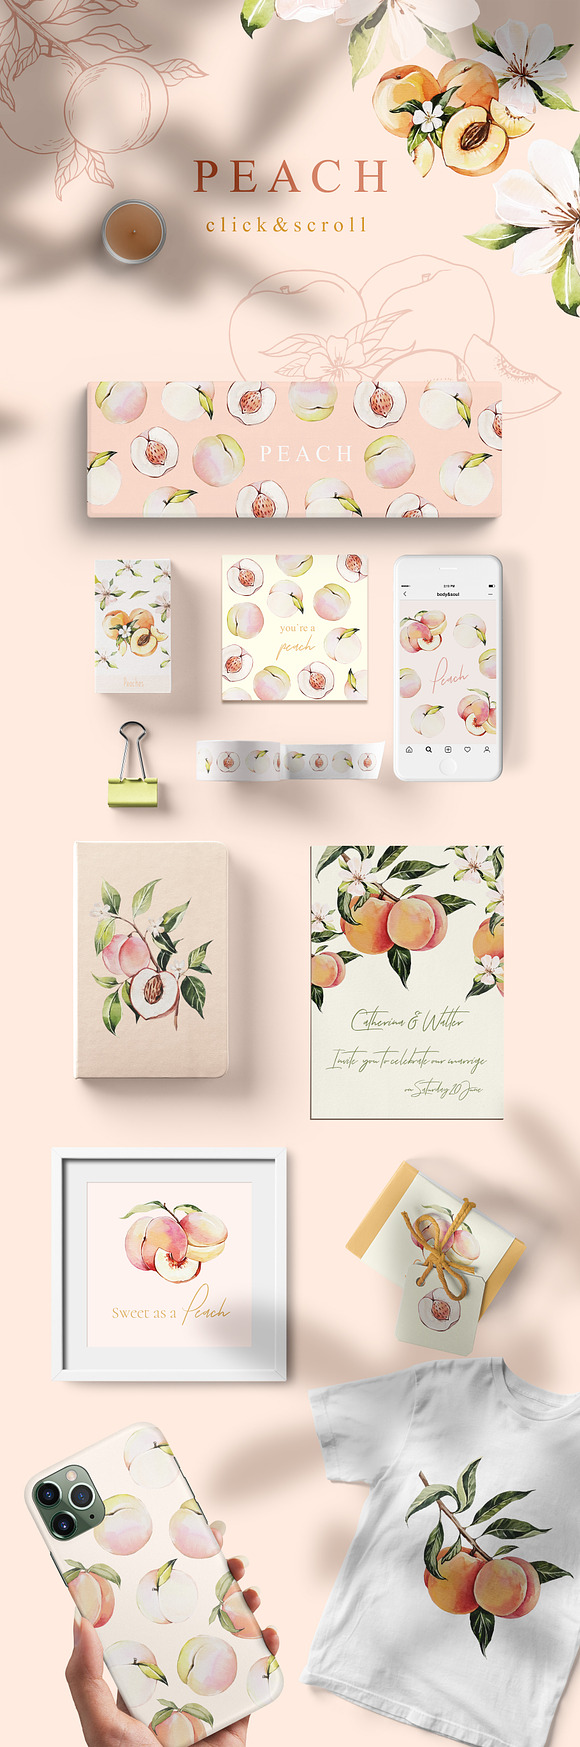 GREEN FLEUR & FRUITS-2 in 1 in Objects - product preview 3